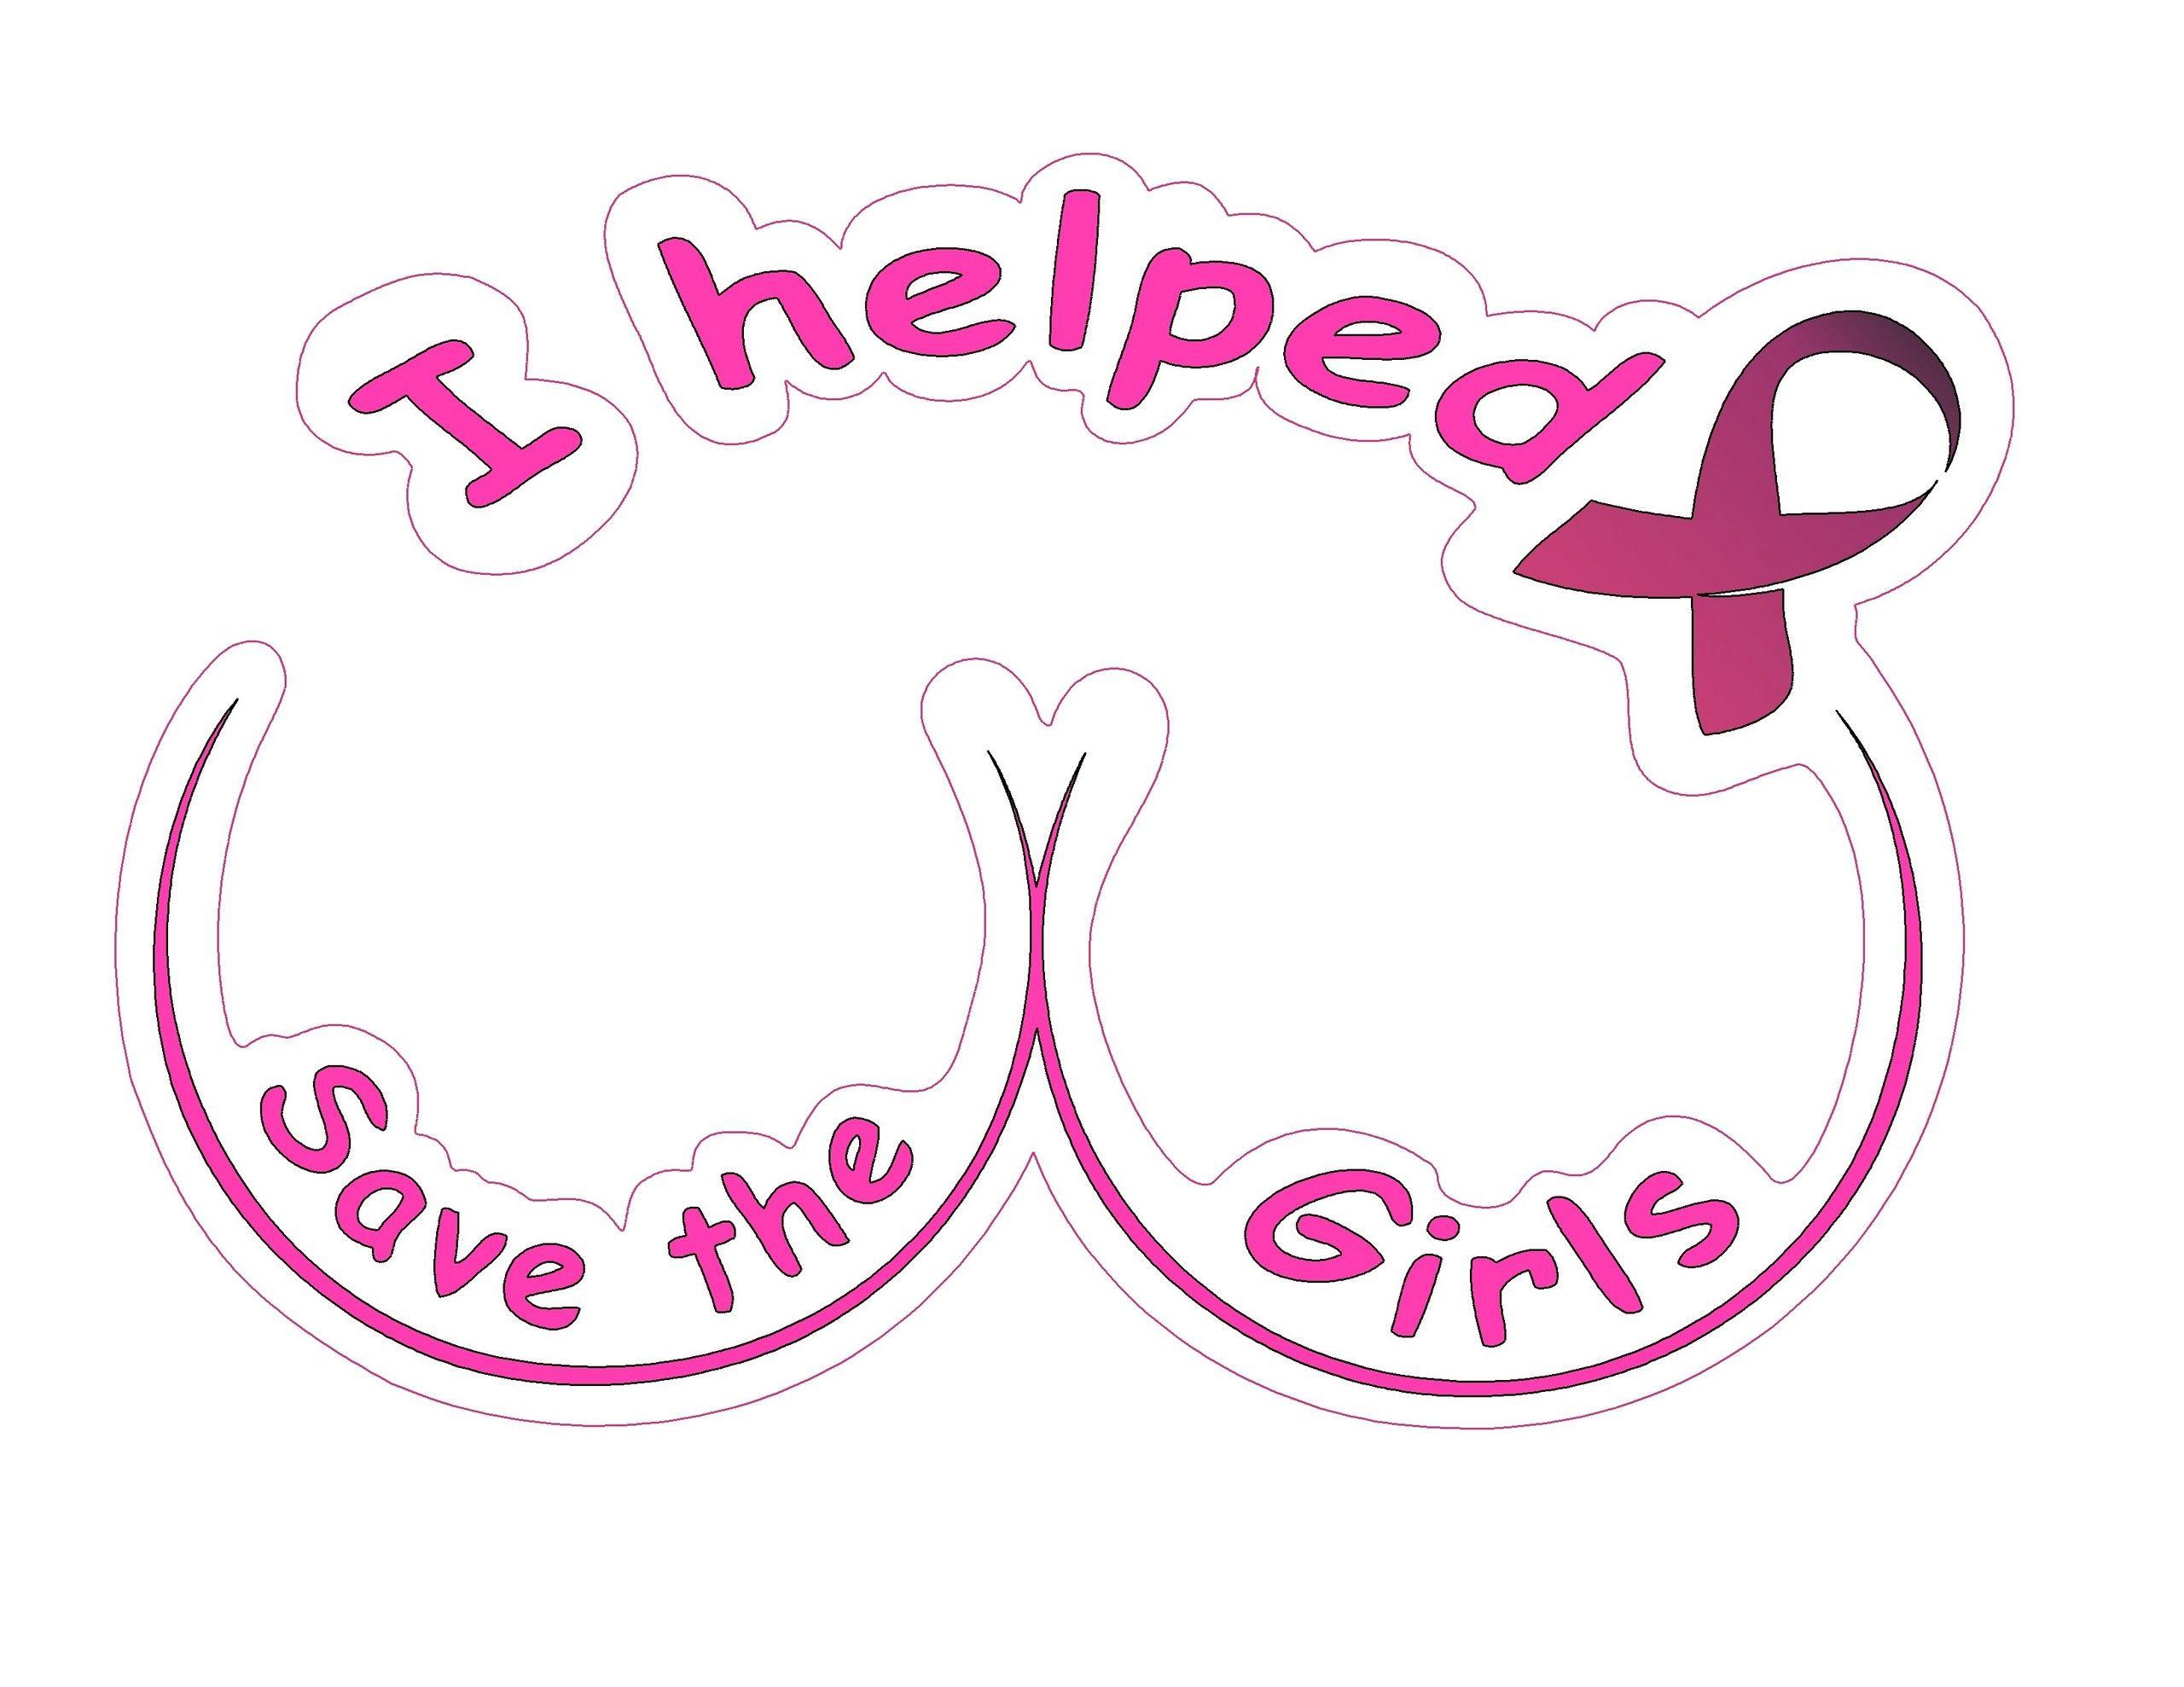 breast cancer awareness decal Cancer Awareness चित्र - फैन्पॉप